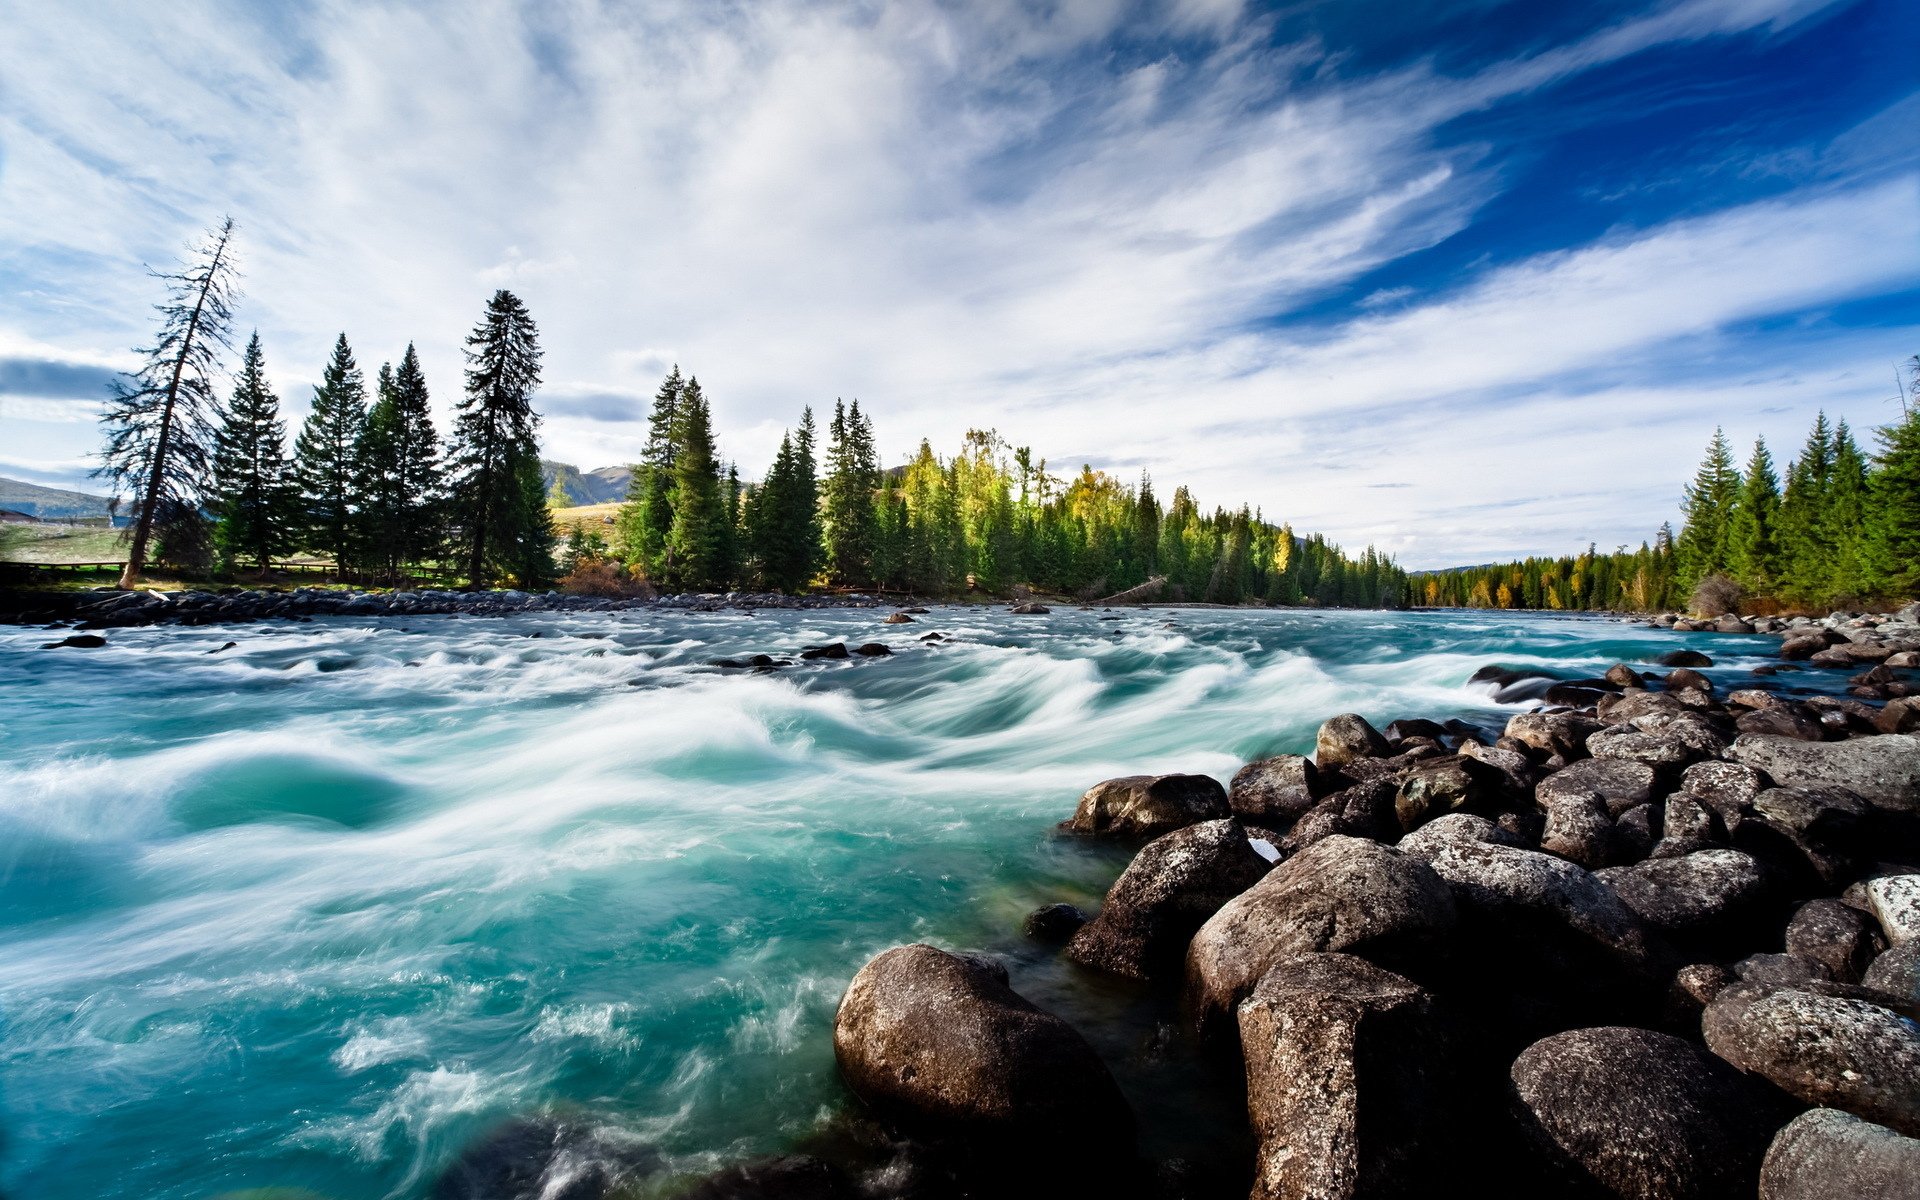 River clean water round stones blue sky fan of clouds trees pine wallpaperx1200